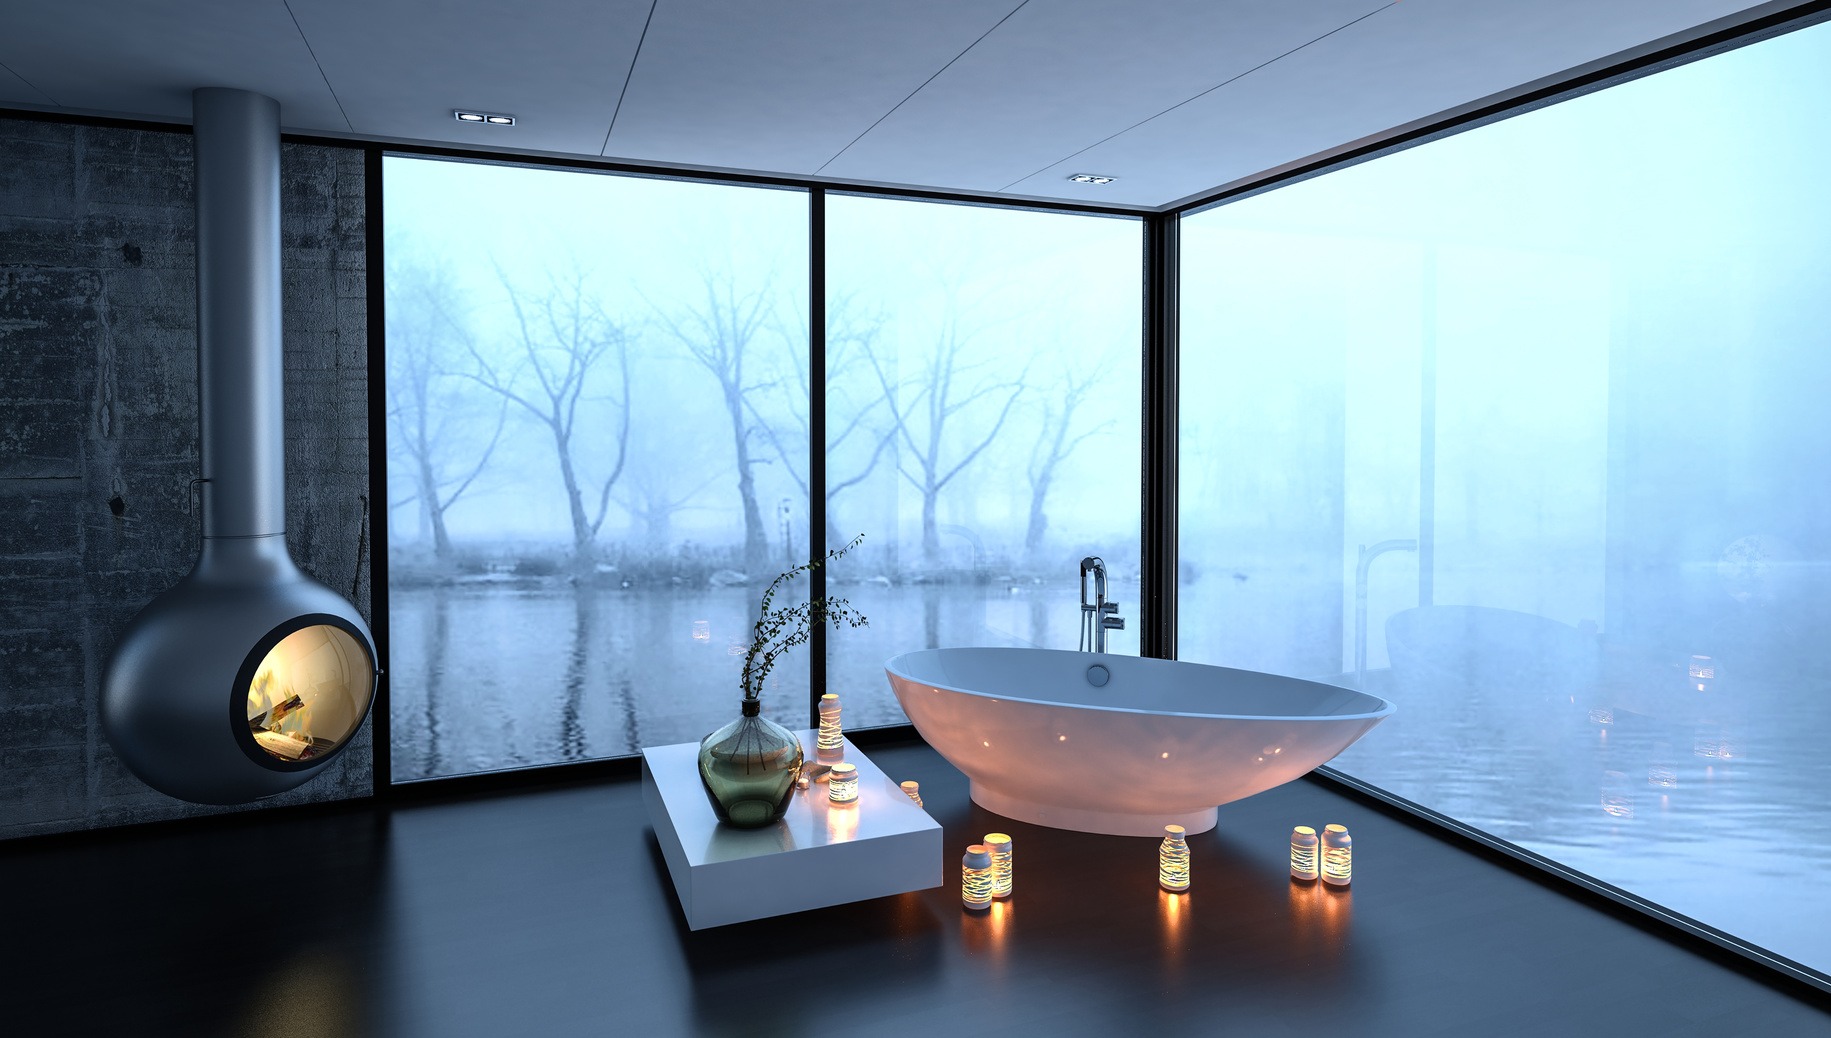 Bathtub surrounded by fireplace and candles